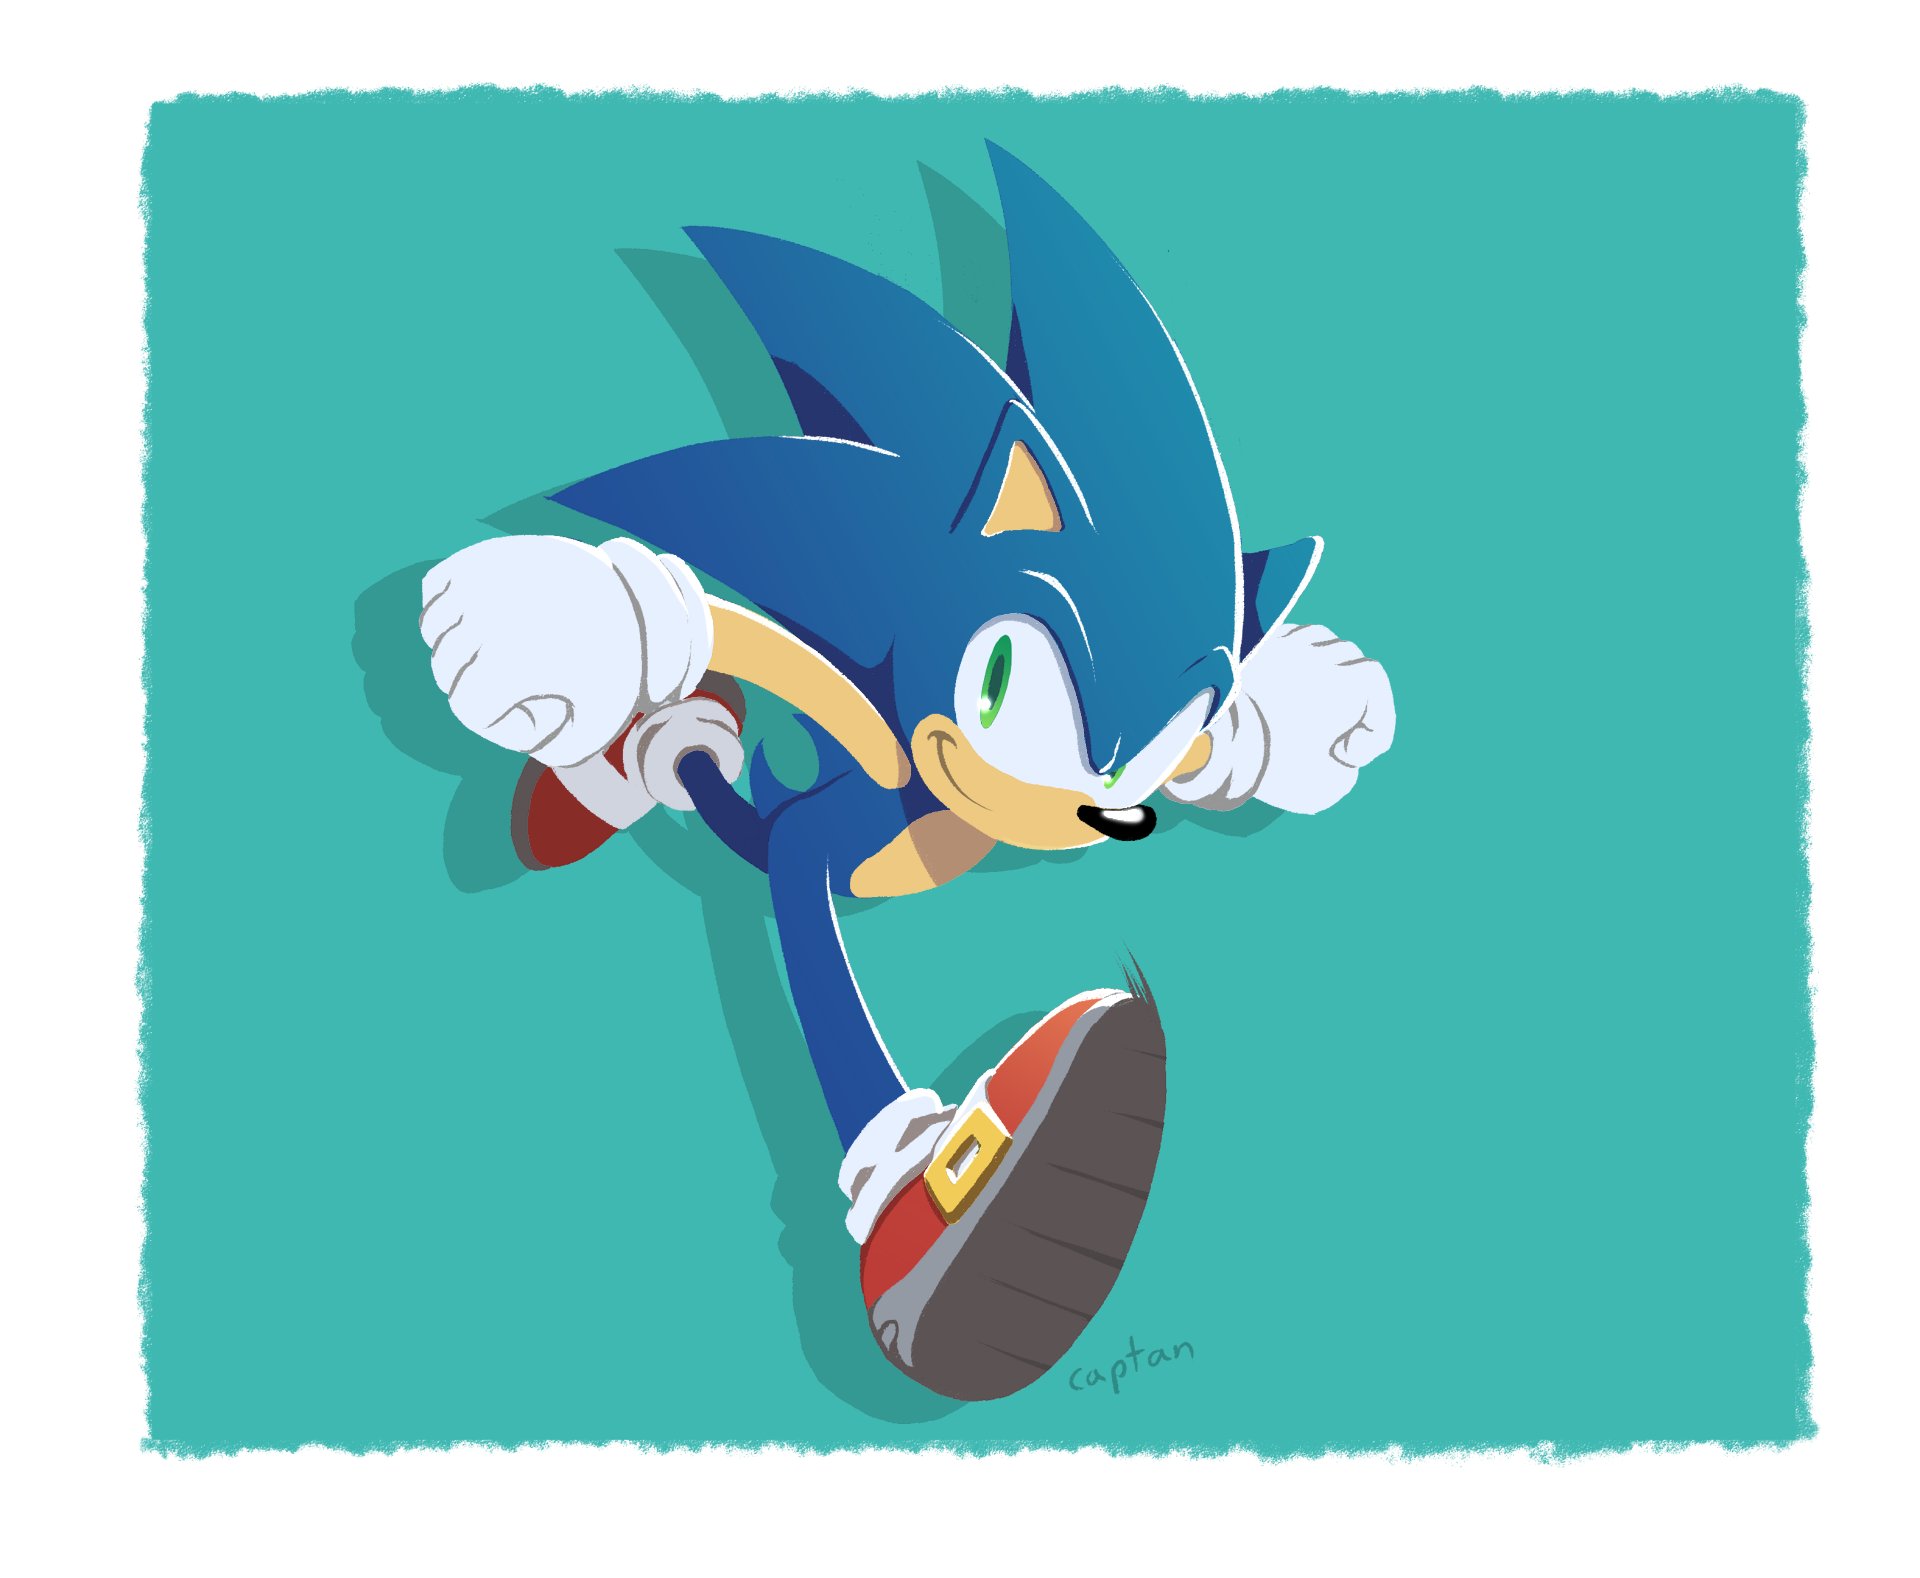 video game, sonic the hedgehog, green eyes, smile, sneakers, sonic